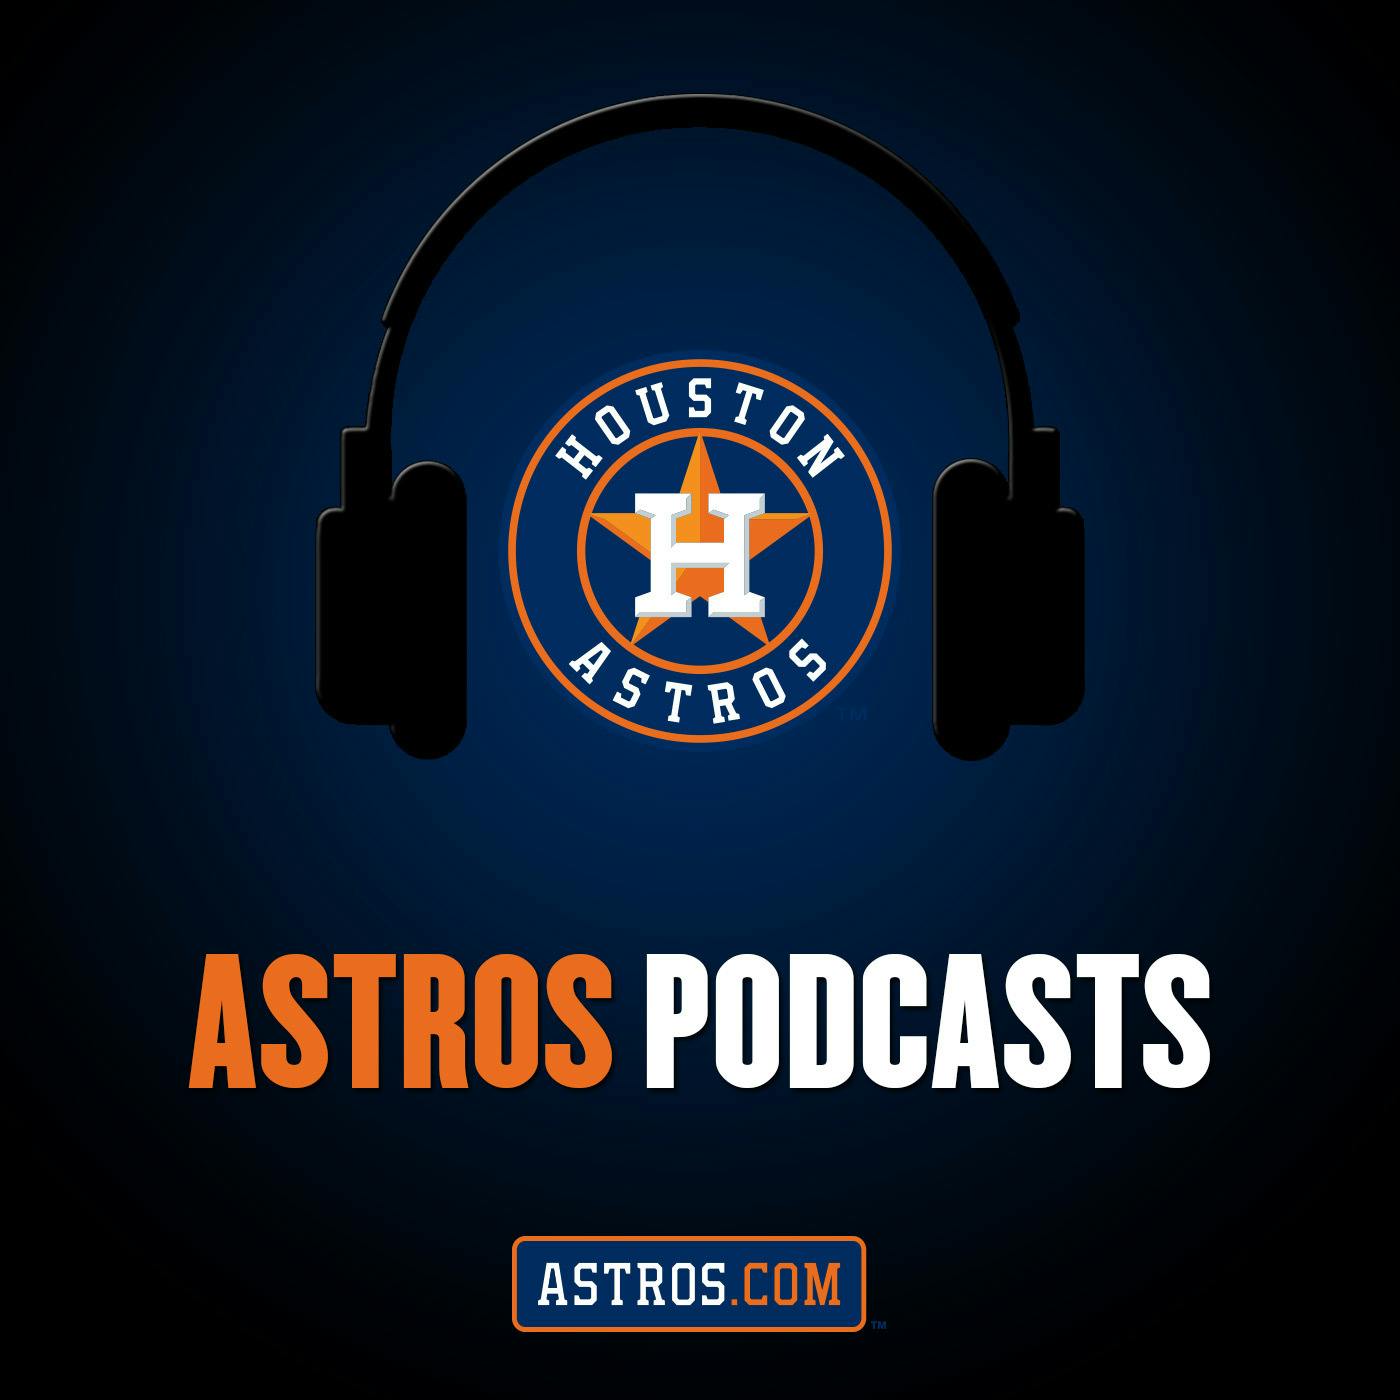 6/22 ASTRO POD featuring Brian McTaggart